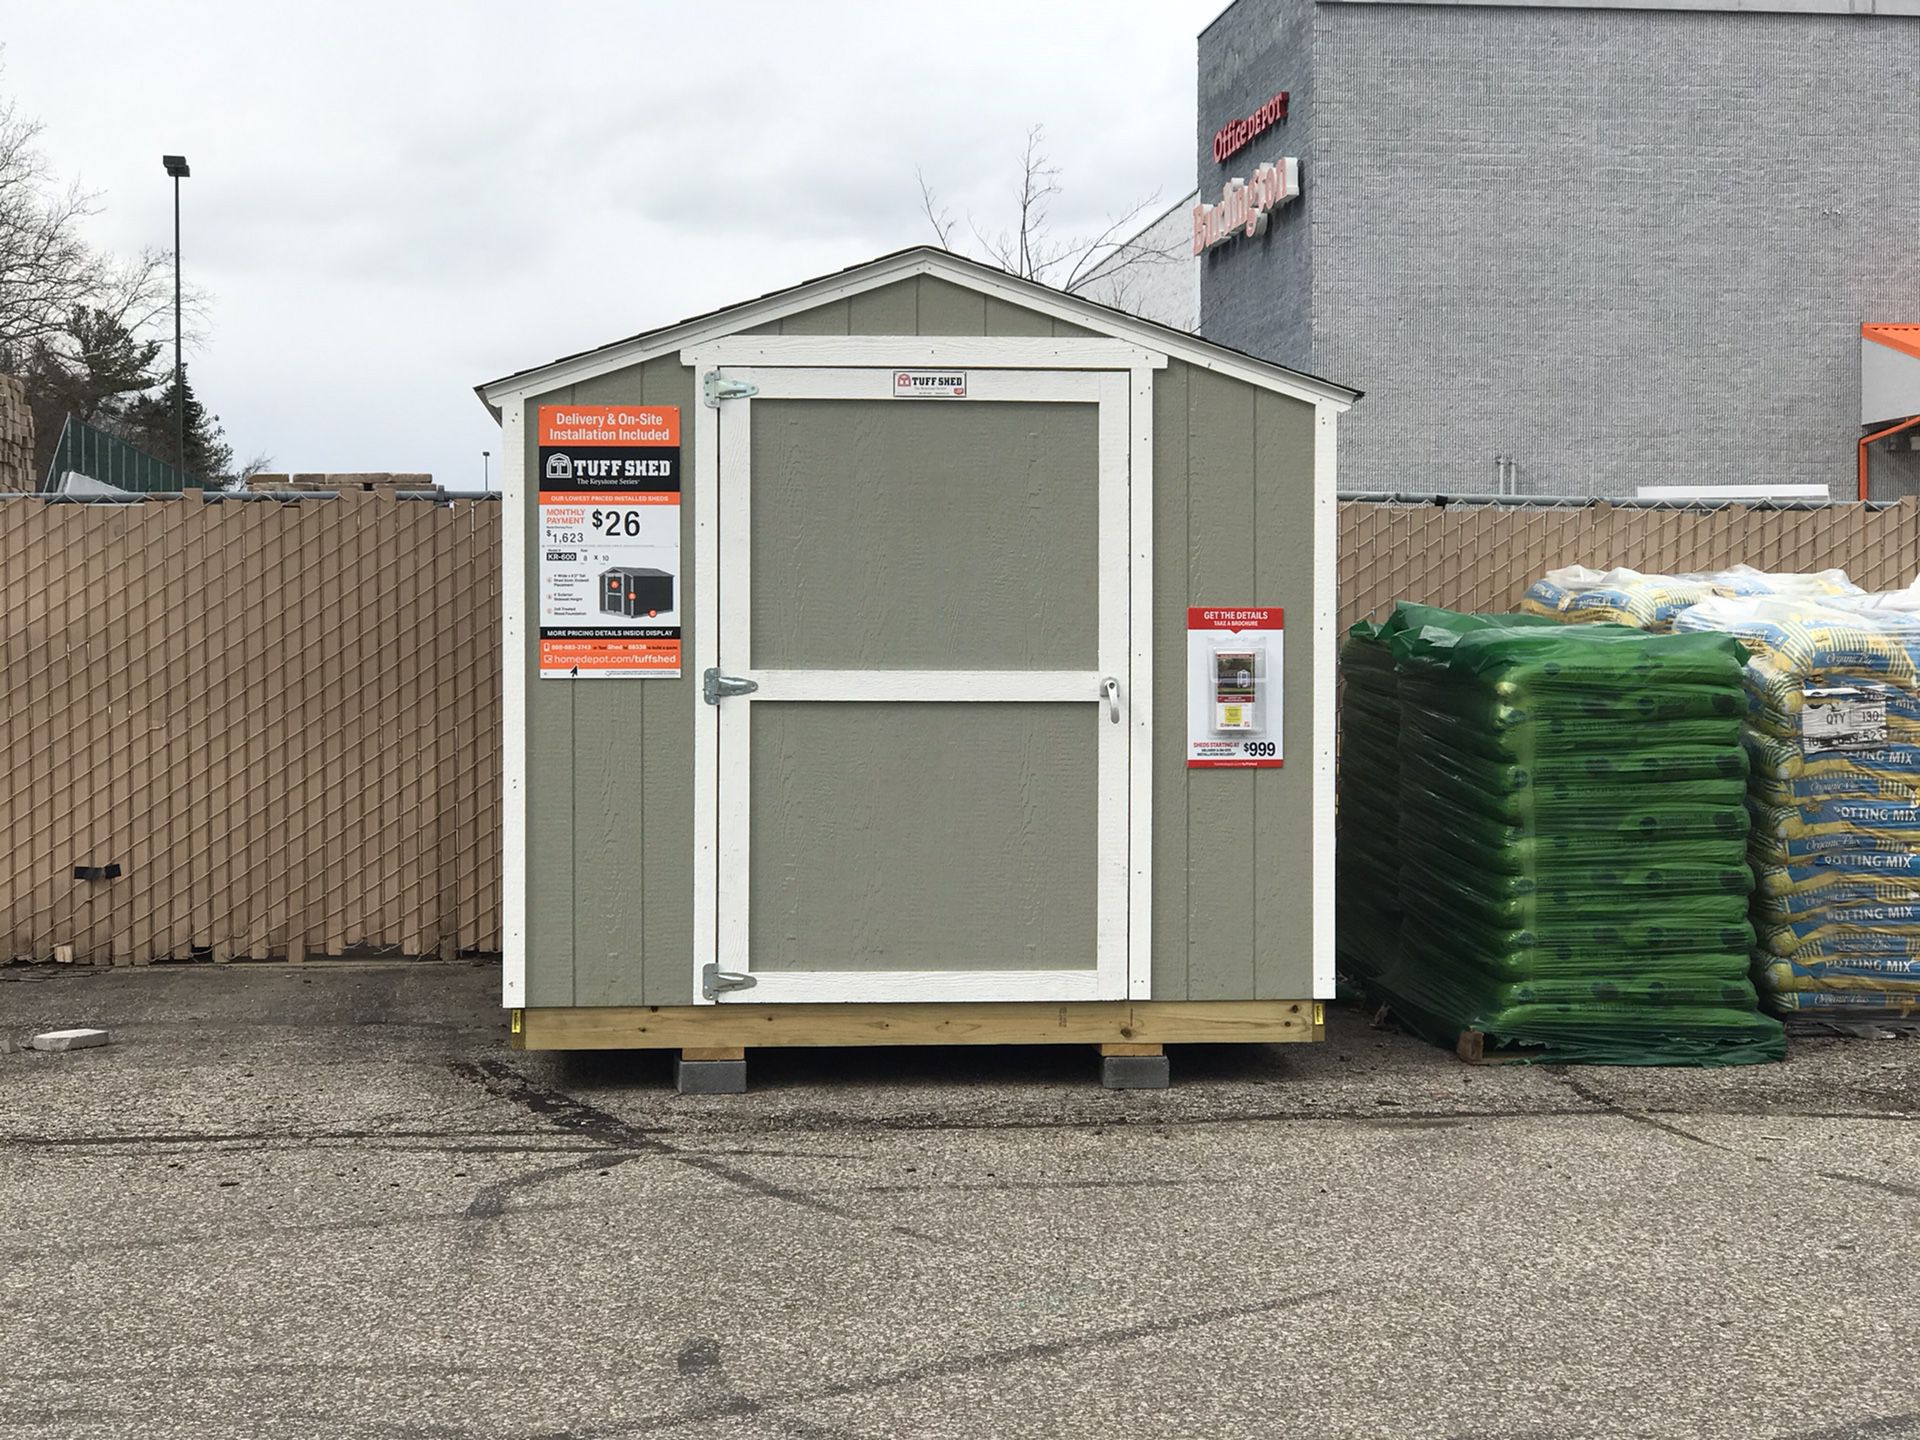 Sheds starting at $999 includes on-site installation